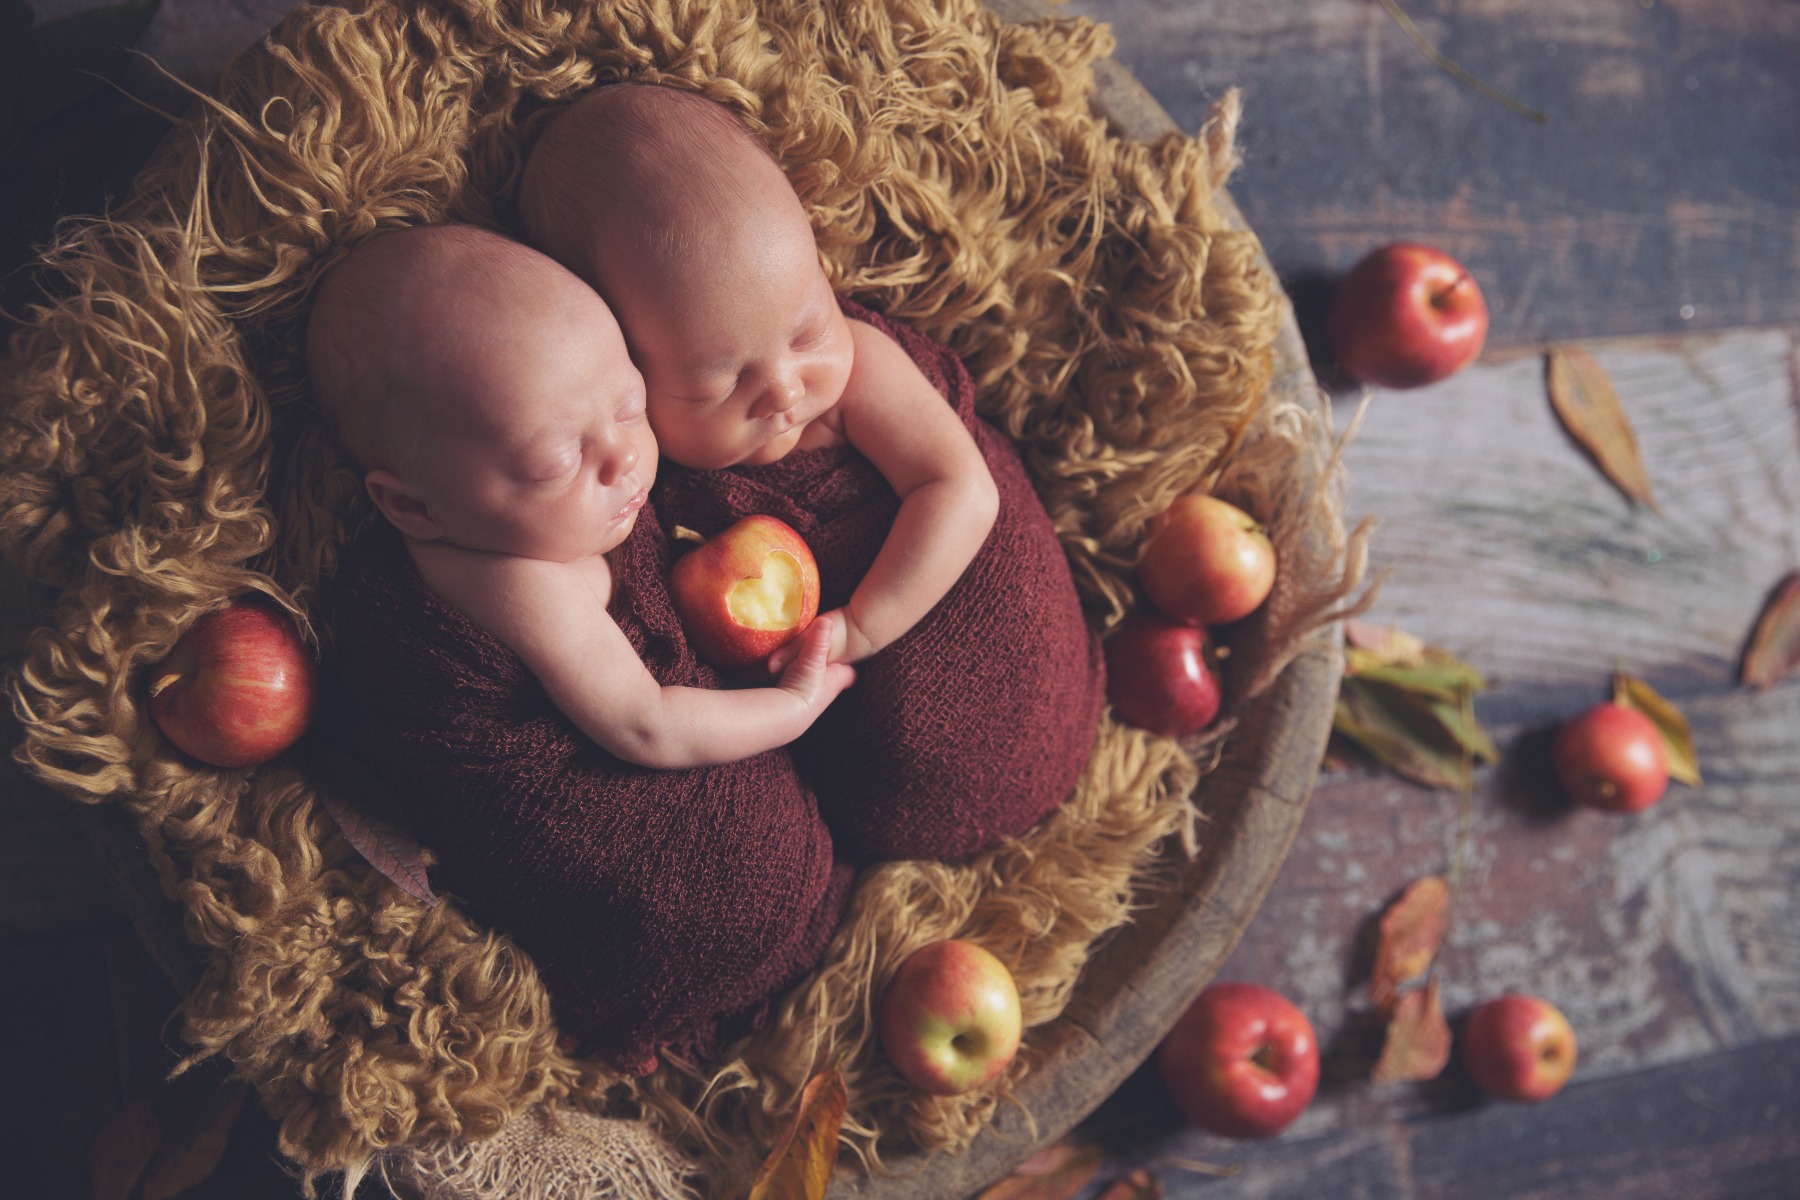 newborn twins in a basket surrounded by apples and a half eaten apple in the shape of a heart